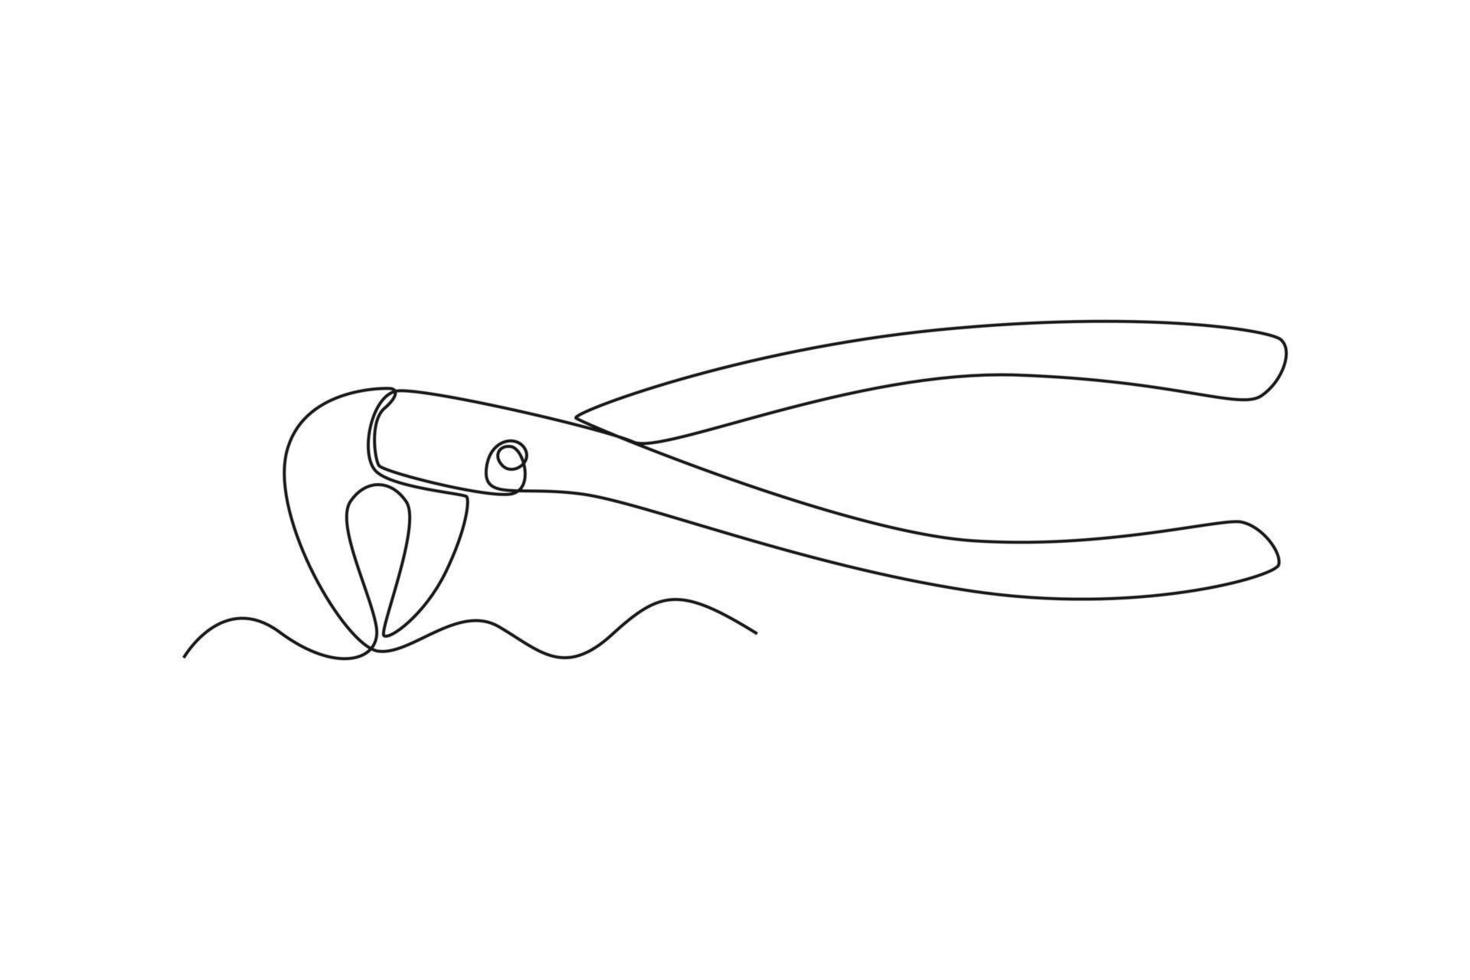 Continuous one line drawing Dental pliers. Dental health concept. Single line draw design vector graphic illustration.